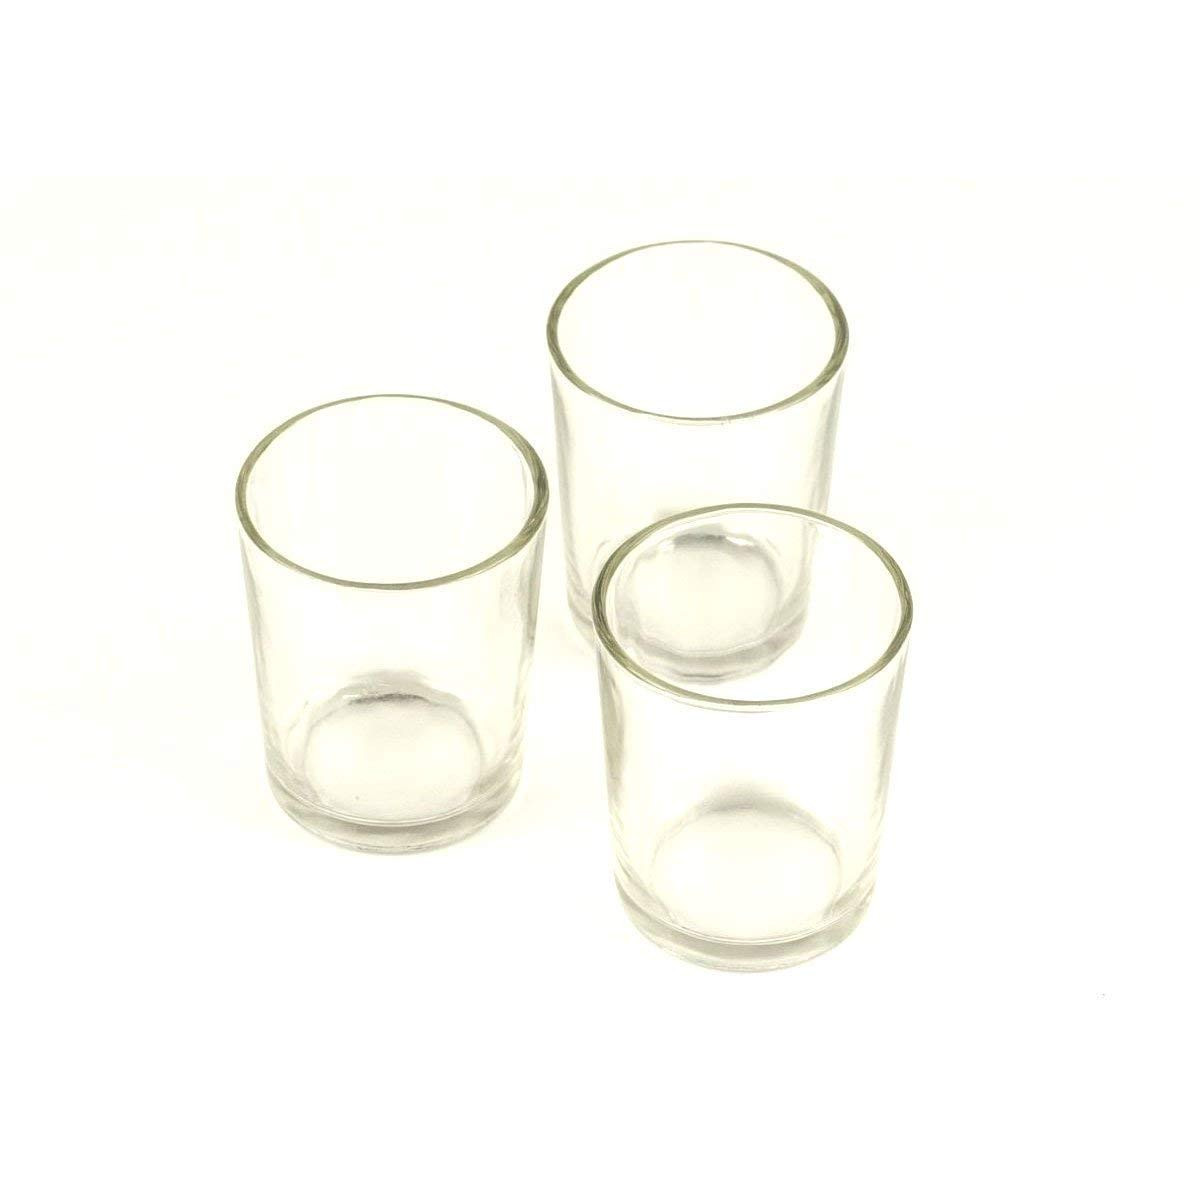 17 Ideal 6 X 12 Glass Cylinder Vase 2024 free download 6 x 12 glass cylinder vase of amazon com clear glass votive holders 2 5 pack of 12 home kitchen with 51peo9vaadl sl1200